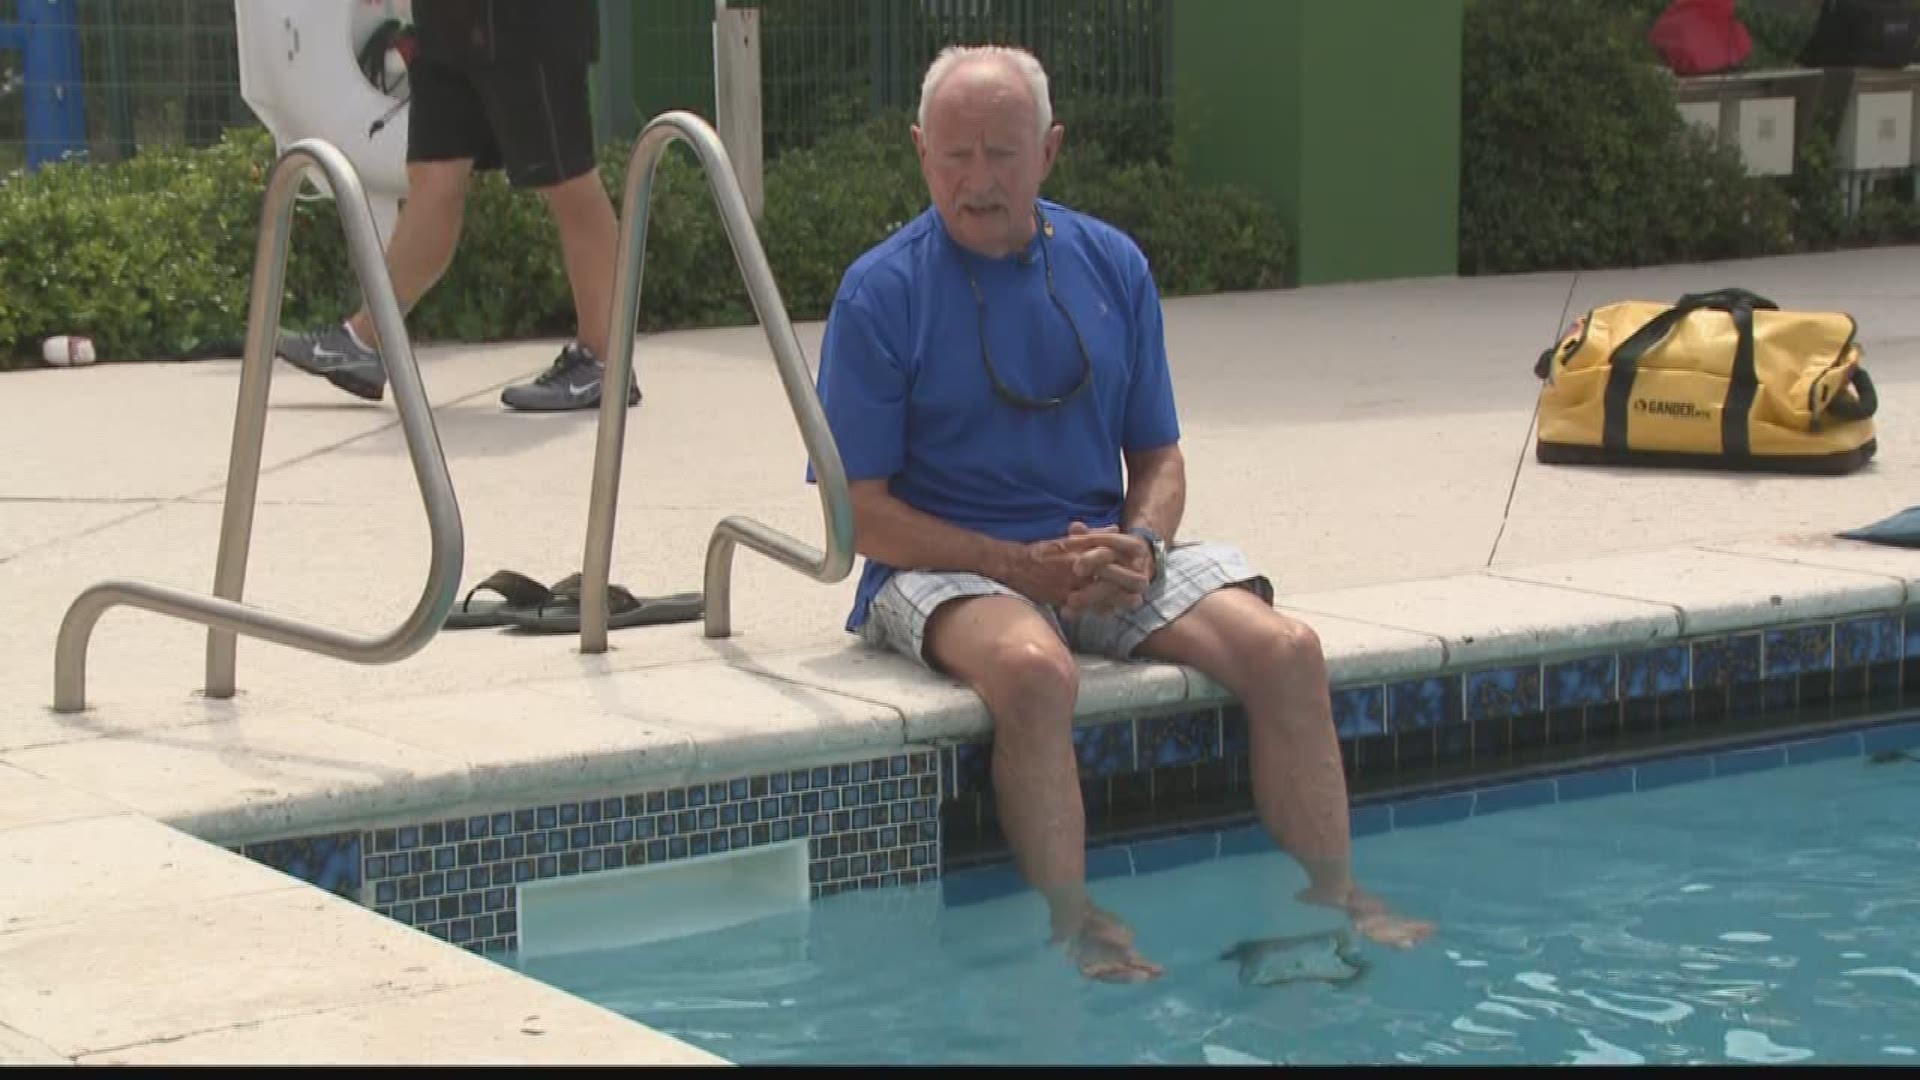 Our Jeff Valin talks with a First Coast man who not only survived a stroke, but is defying age altogether and he knows he has more time ahead because of how *little* time it took to get help.